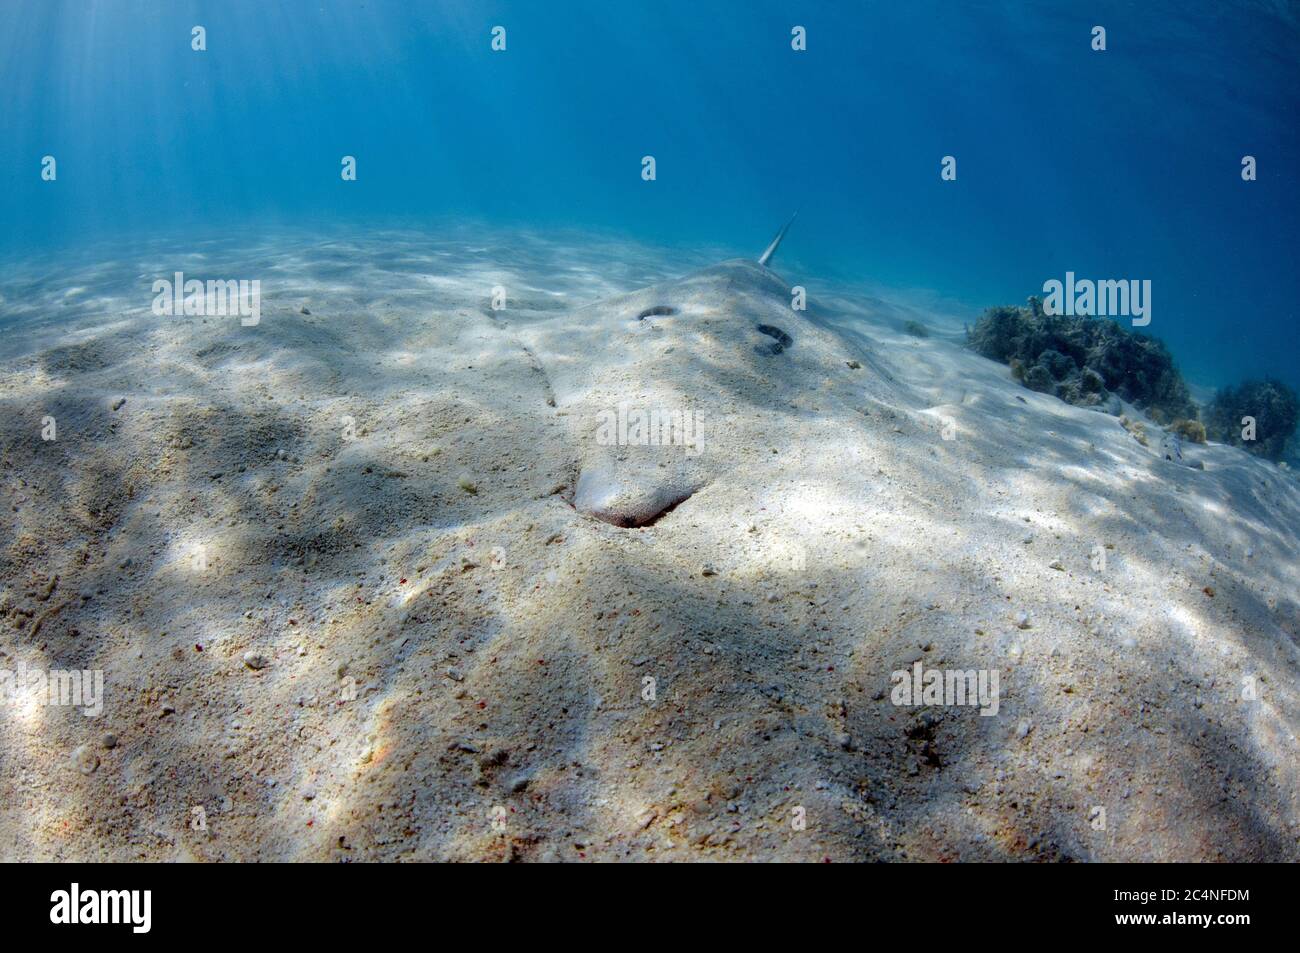 Giant shovelnose ray, Glaucostegus typus, also known as shovelnose guitarfish, Heron Island, Great Barrier Reef, Australia Stock Photo